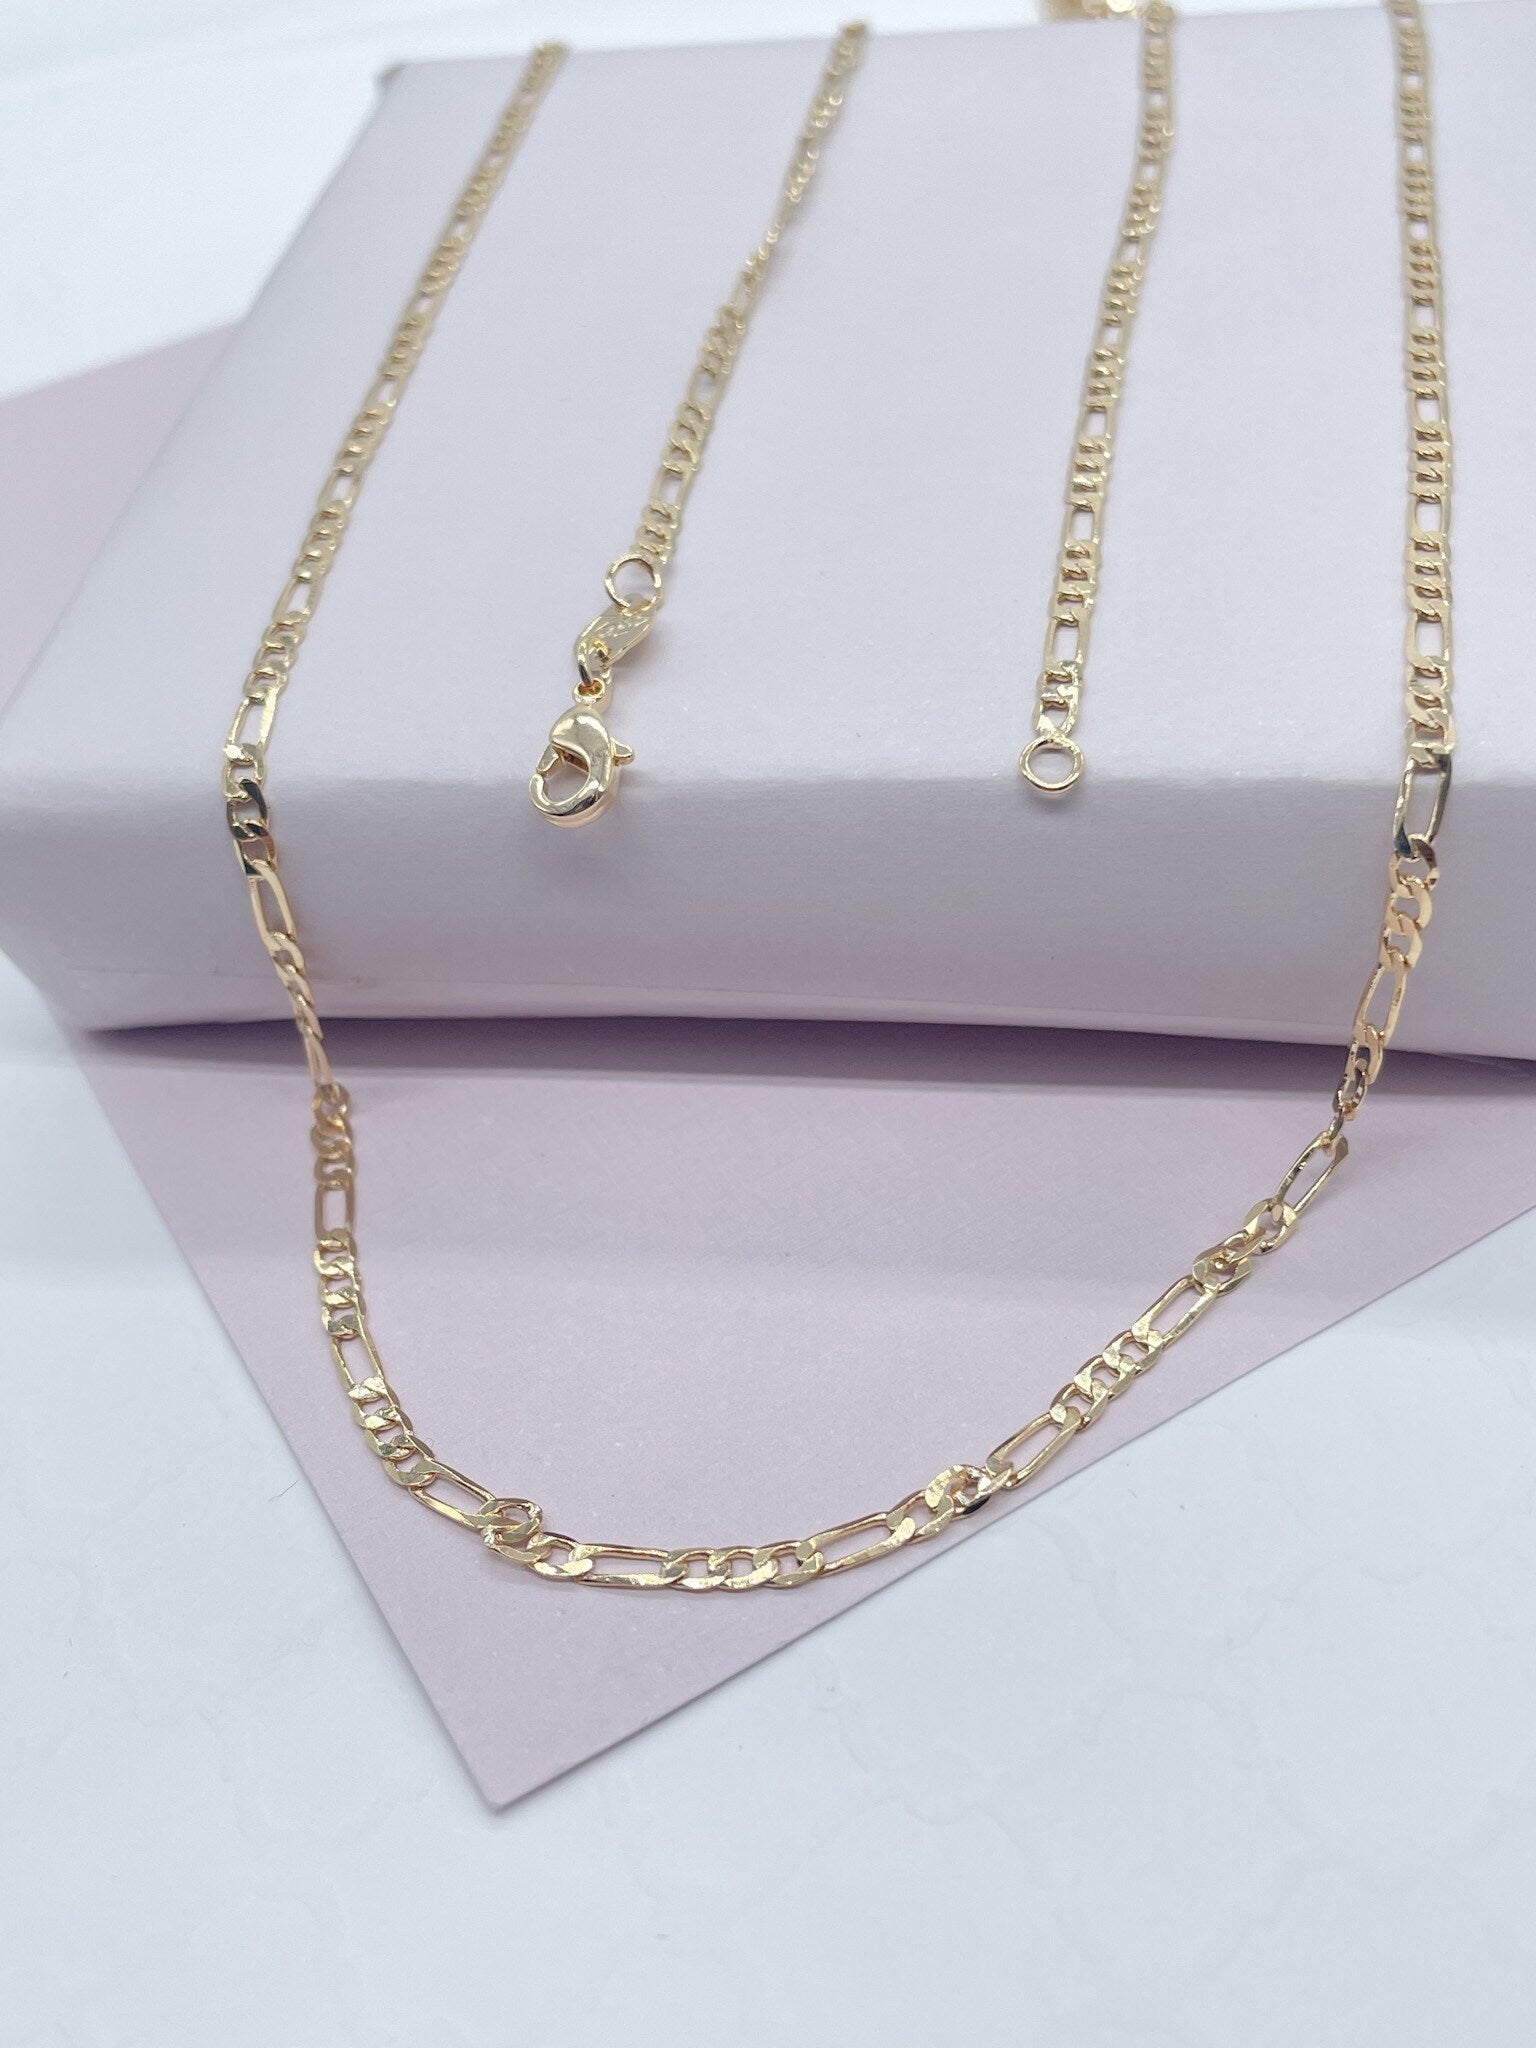 18K Gold Layered 3x1 Figaro 2mm Chain Necklace Wholesale Jewelry Making Supplies 18